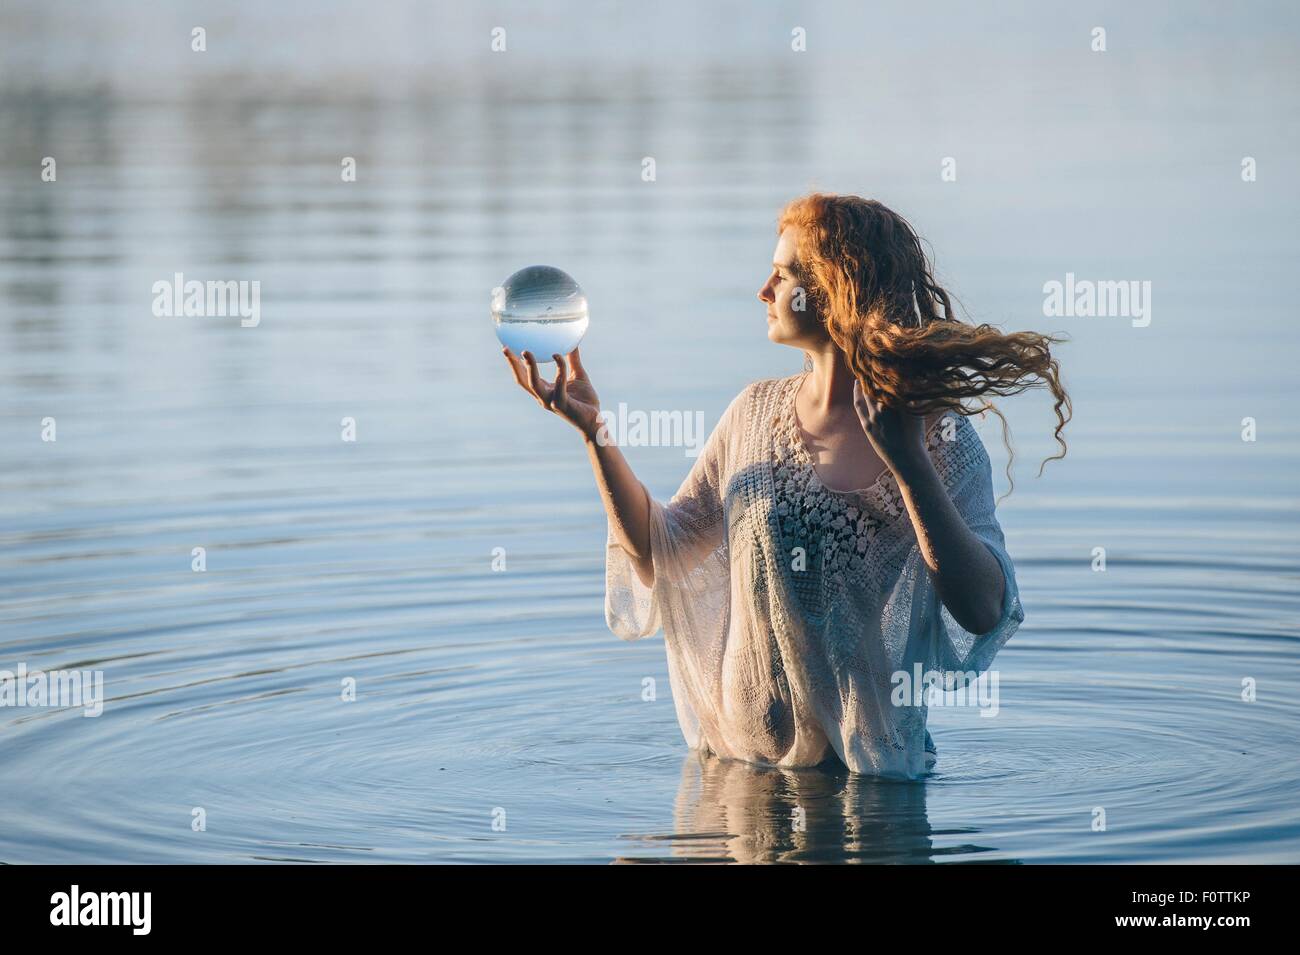 Young woman with long red hair standing in lake gazing at crystal ball Stock Photo